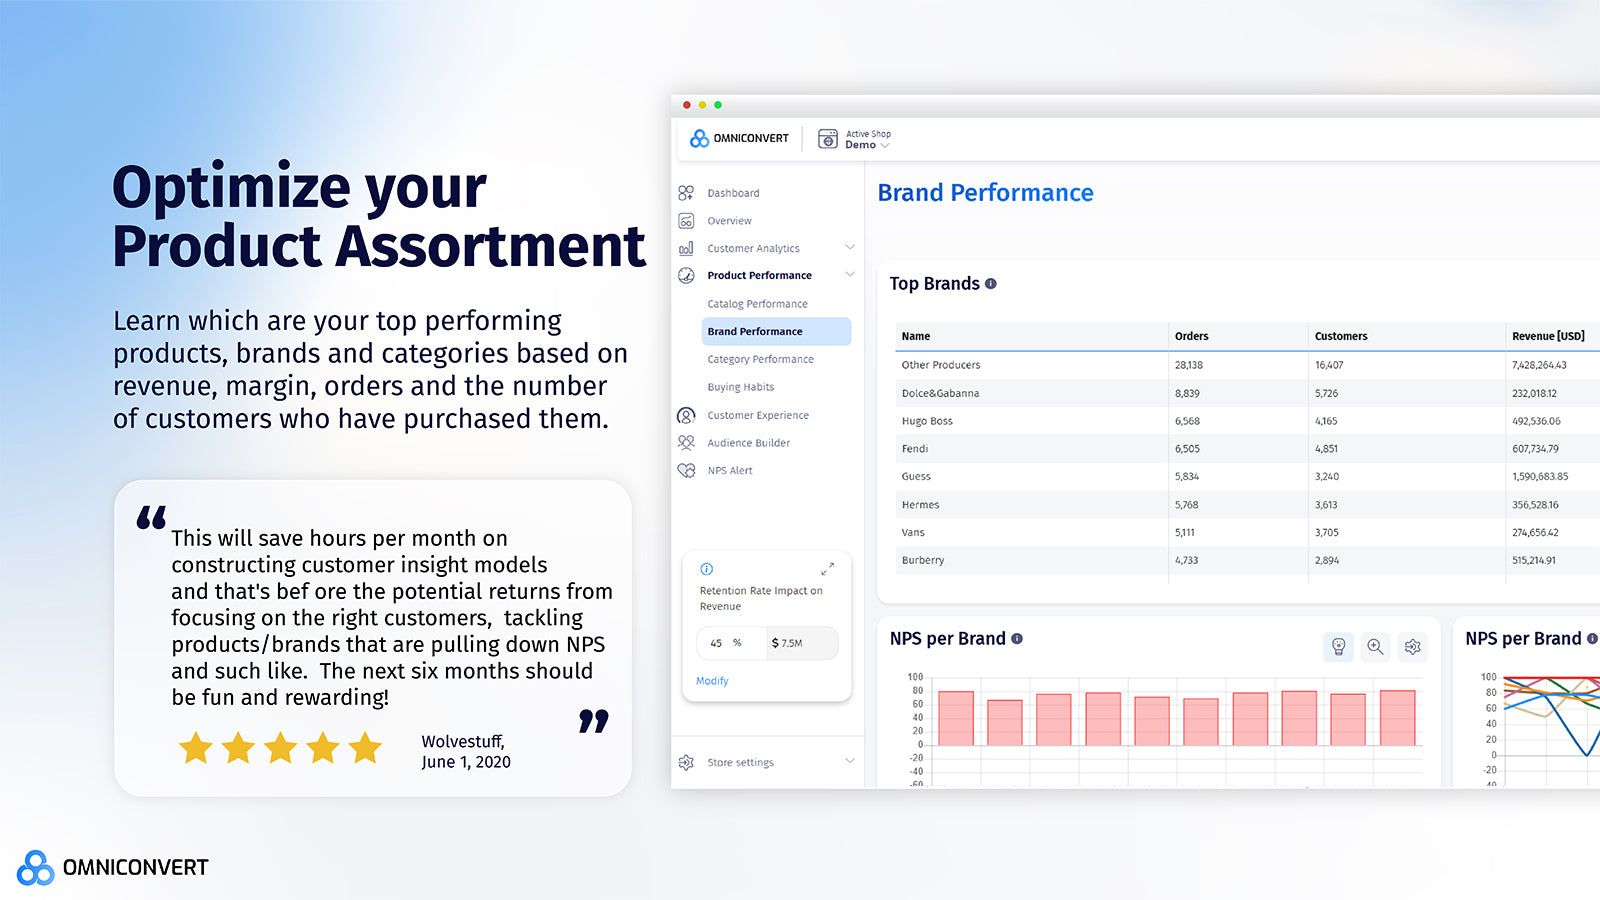 Reveal - Optimize your Product Assortment